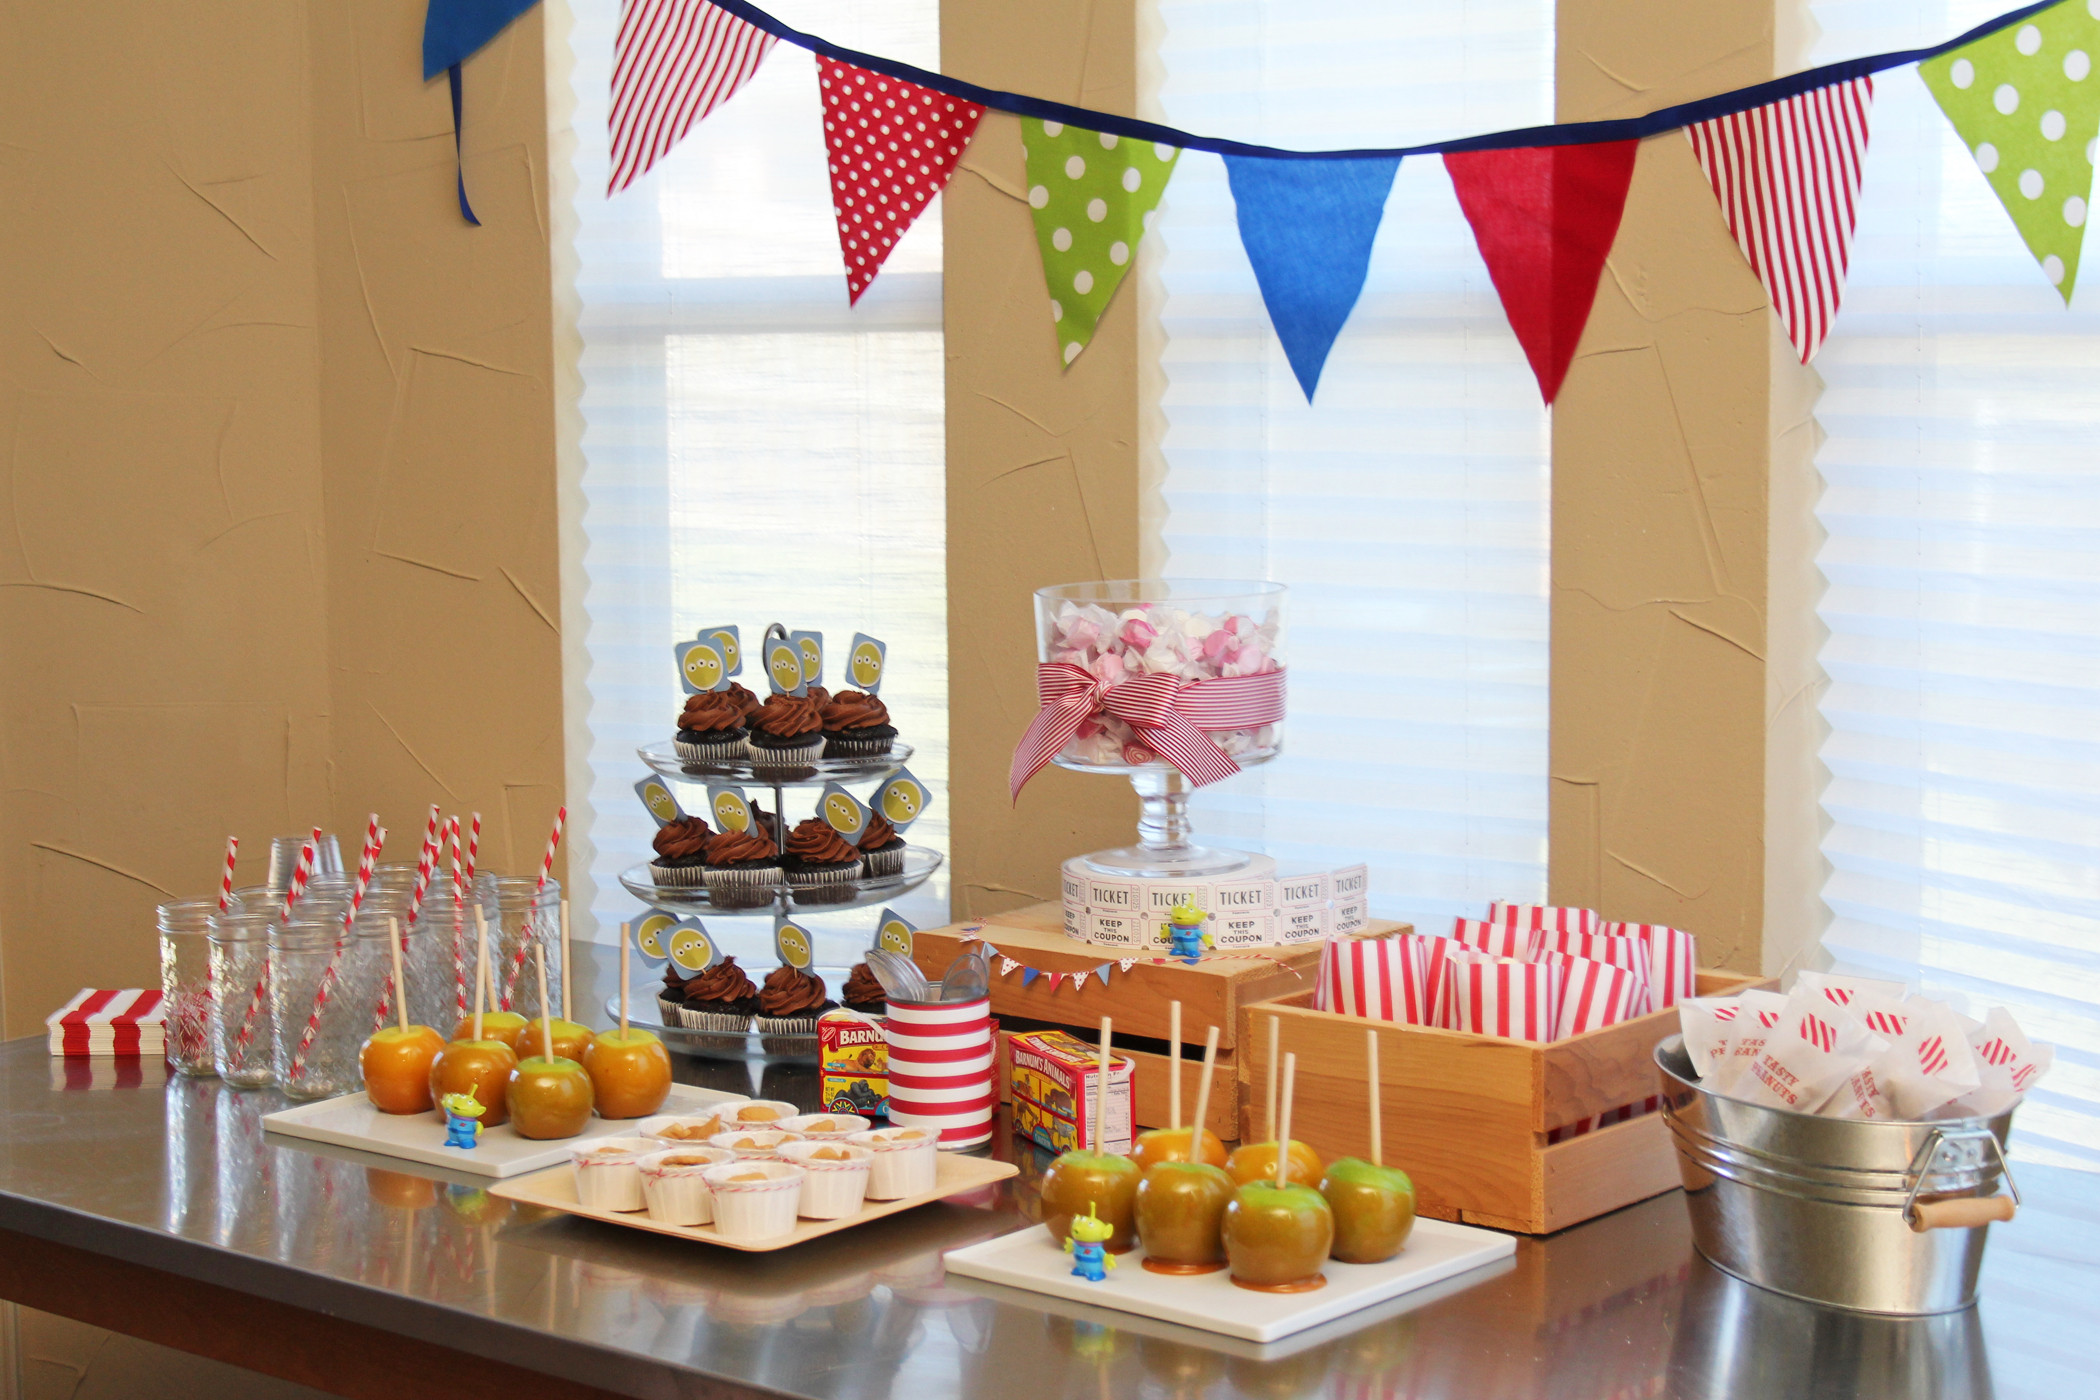 Toy Story Party Food Ideas
 Toy Story Mania Birthday Party